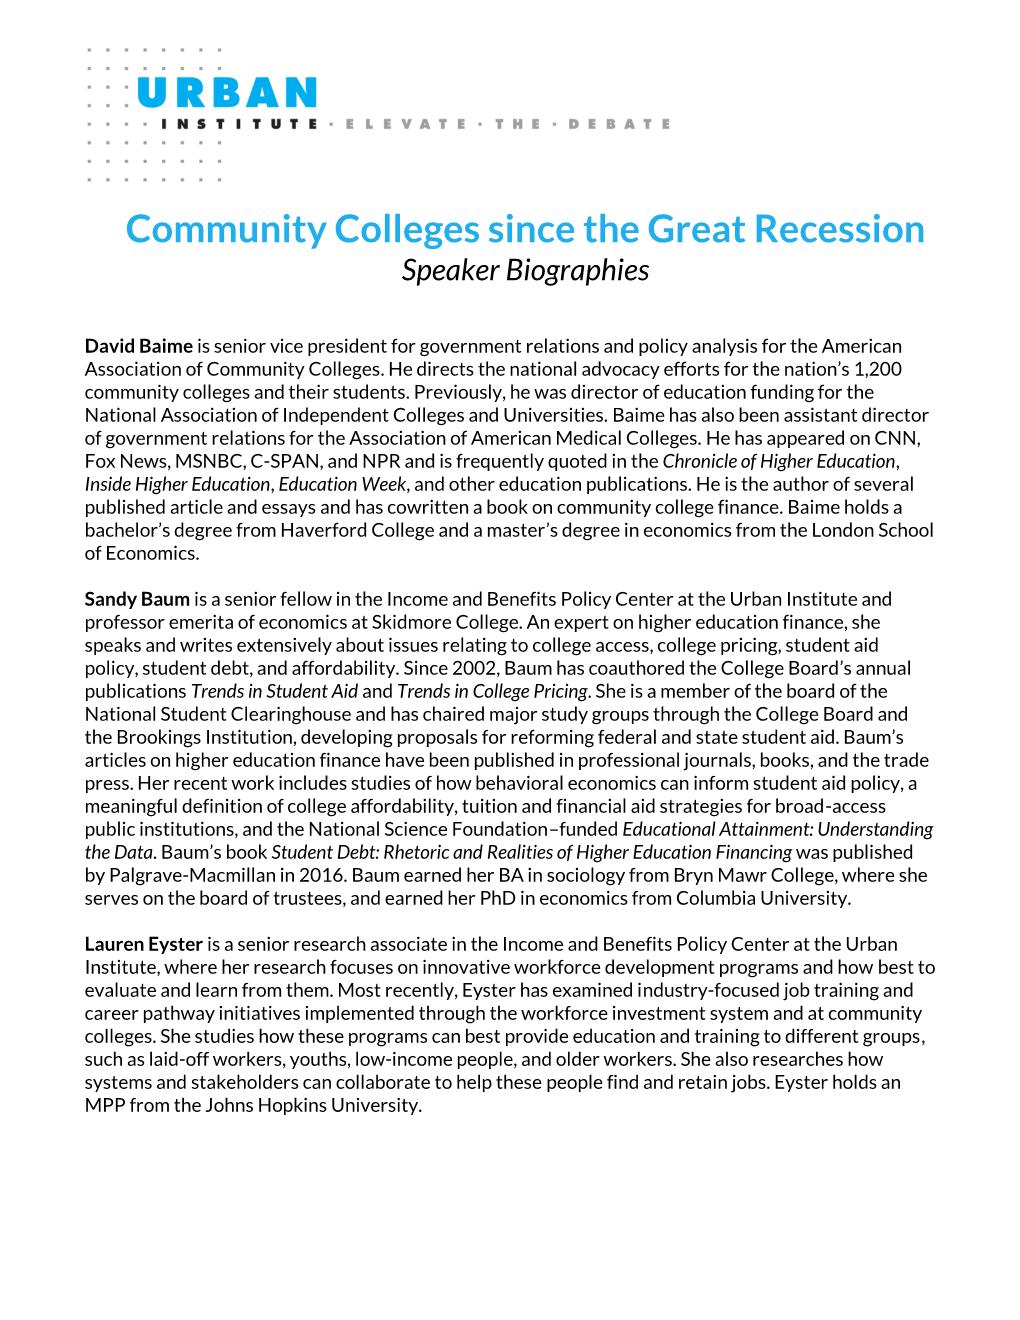 Community Colleges Since the Great Recession Speaker Biographies